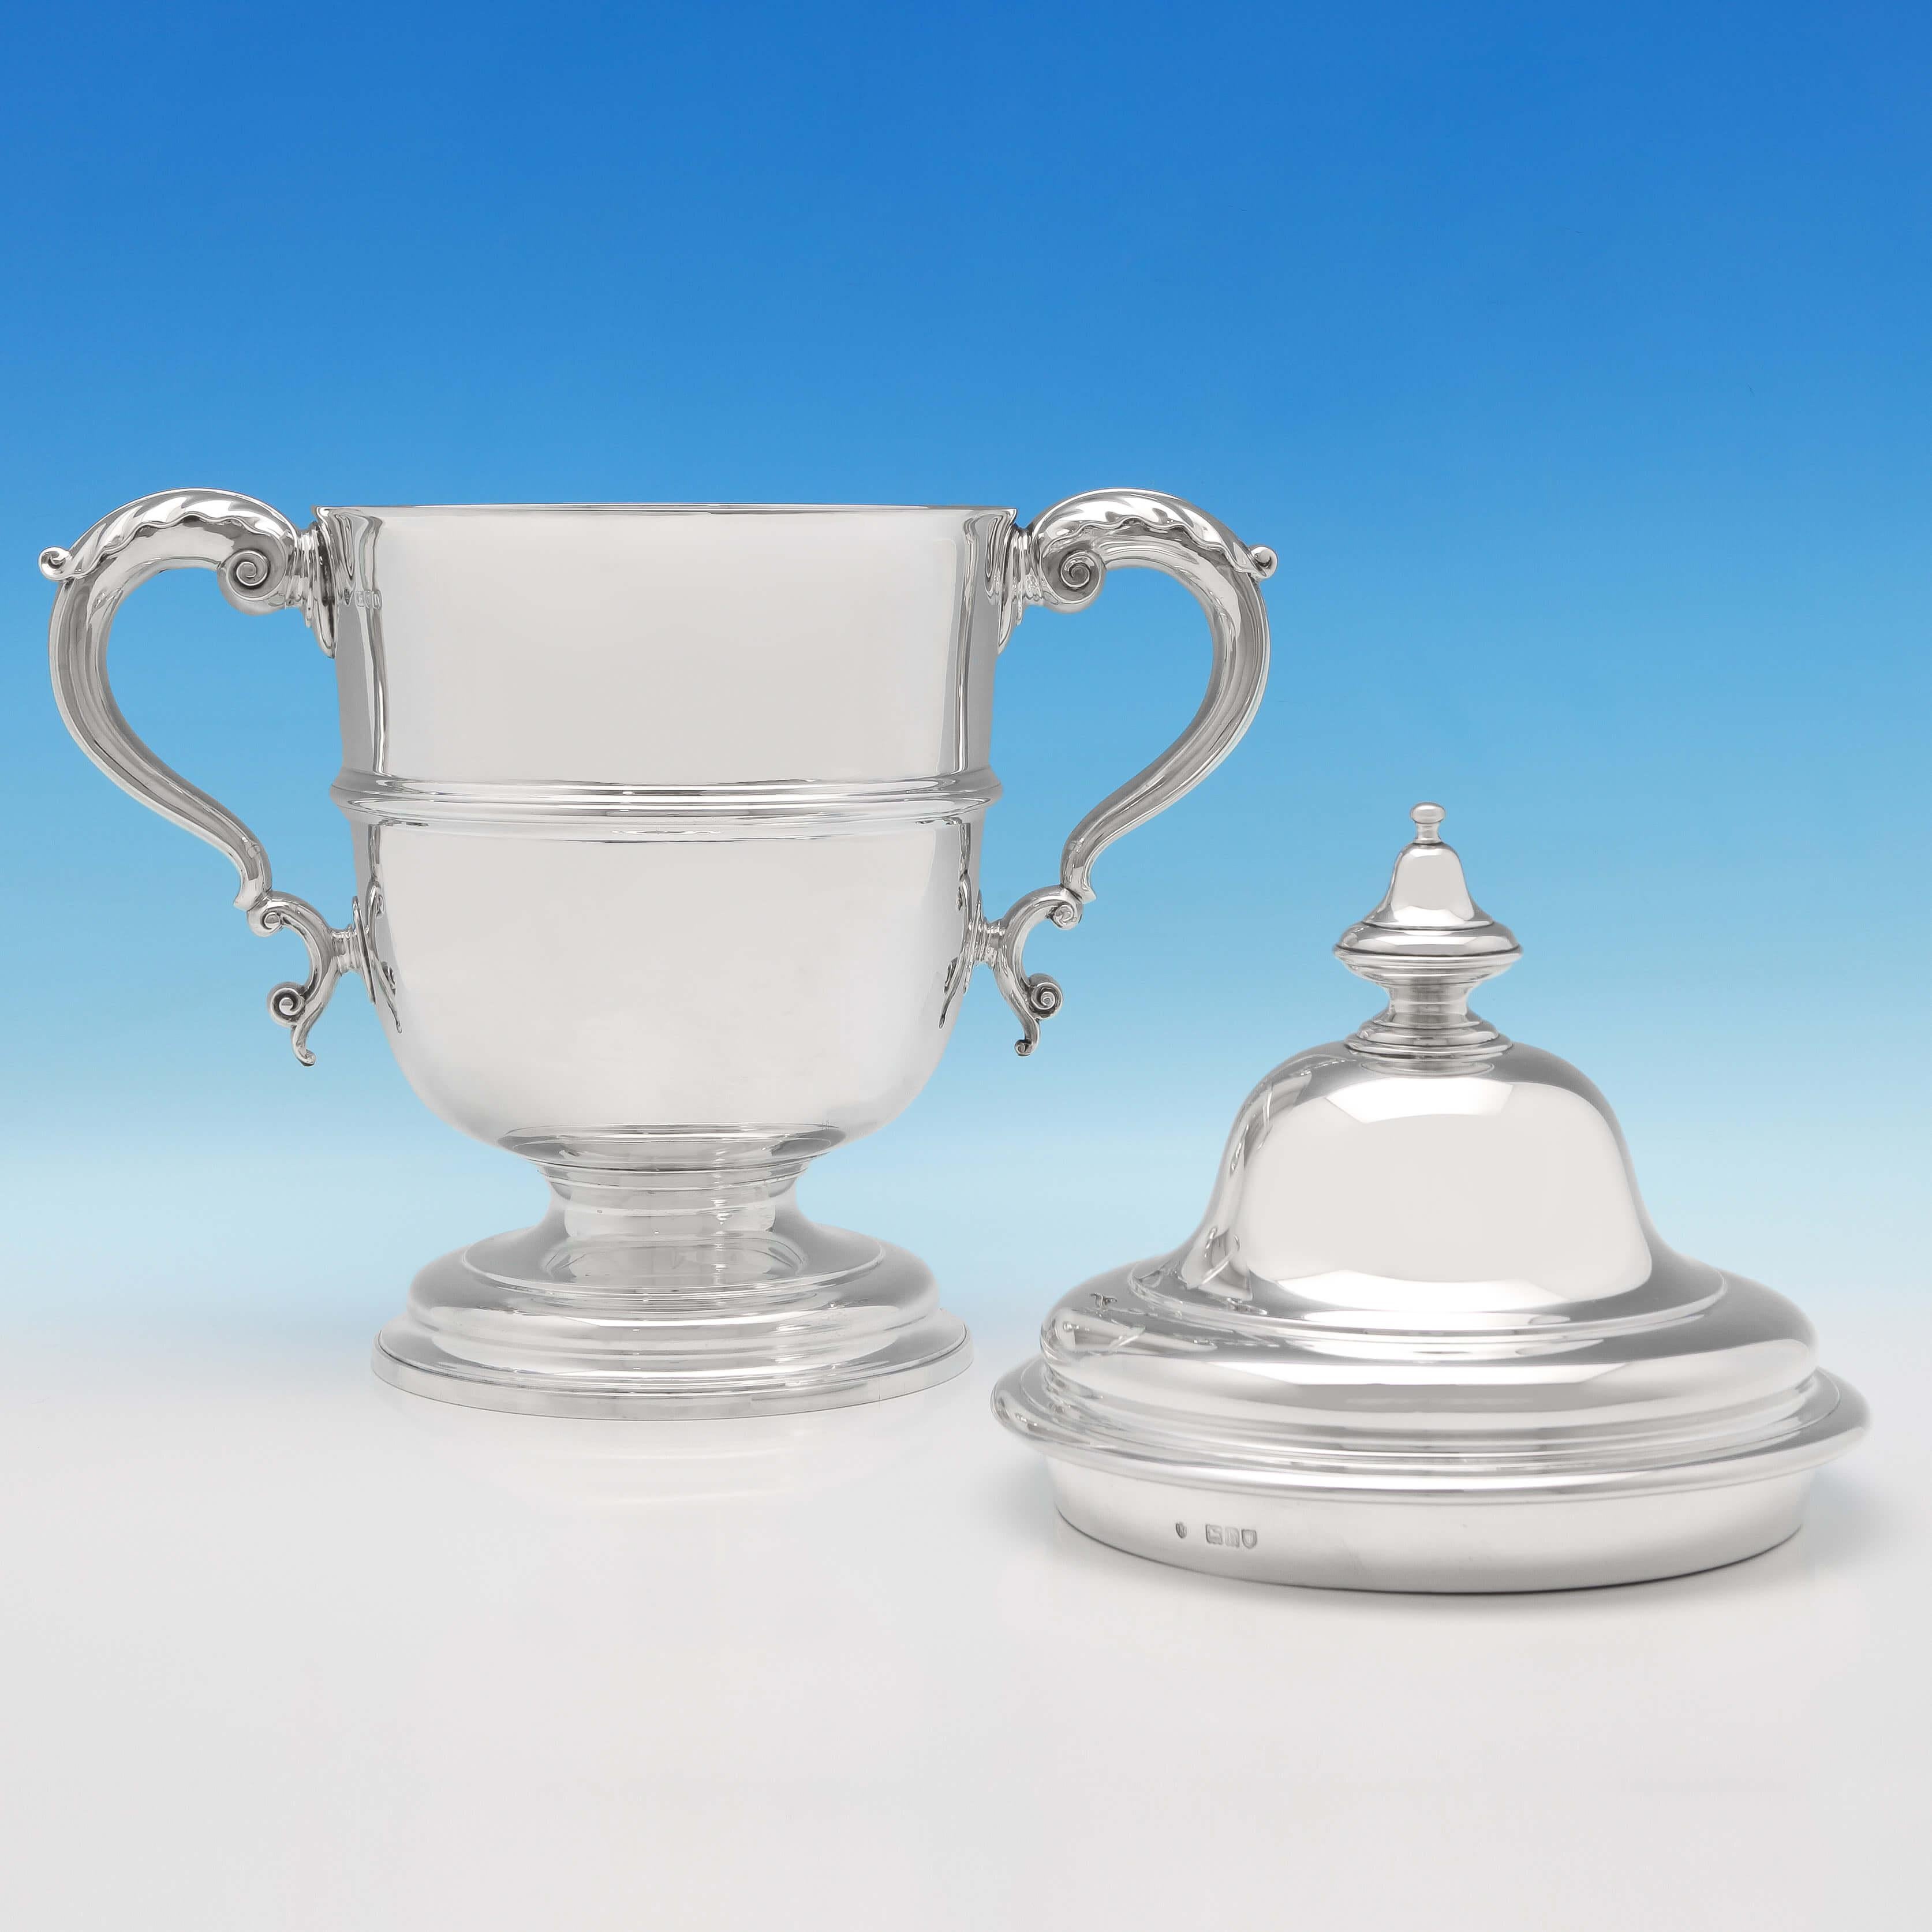 Hallmarked in London in 1903 by Edward Barnard & Sons, this large, Edwardian, antique, sterling silver trophy, features acanthus detailed scroll handles, a central reed band and a pedestal foot. The trophy measures 16